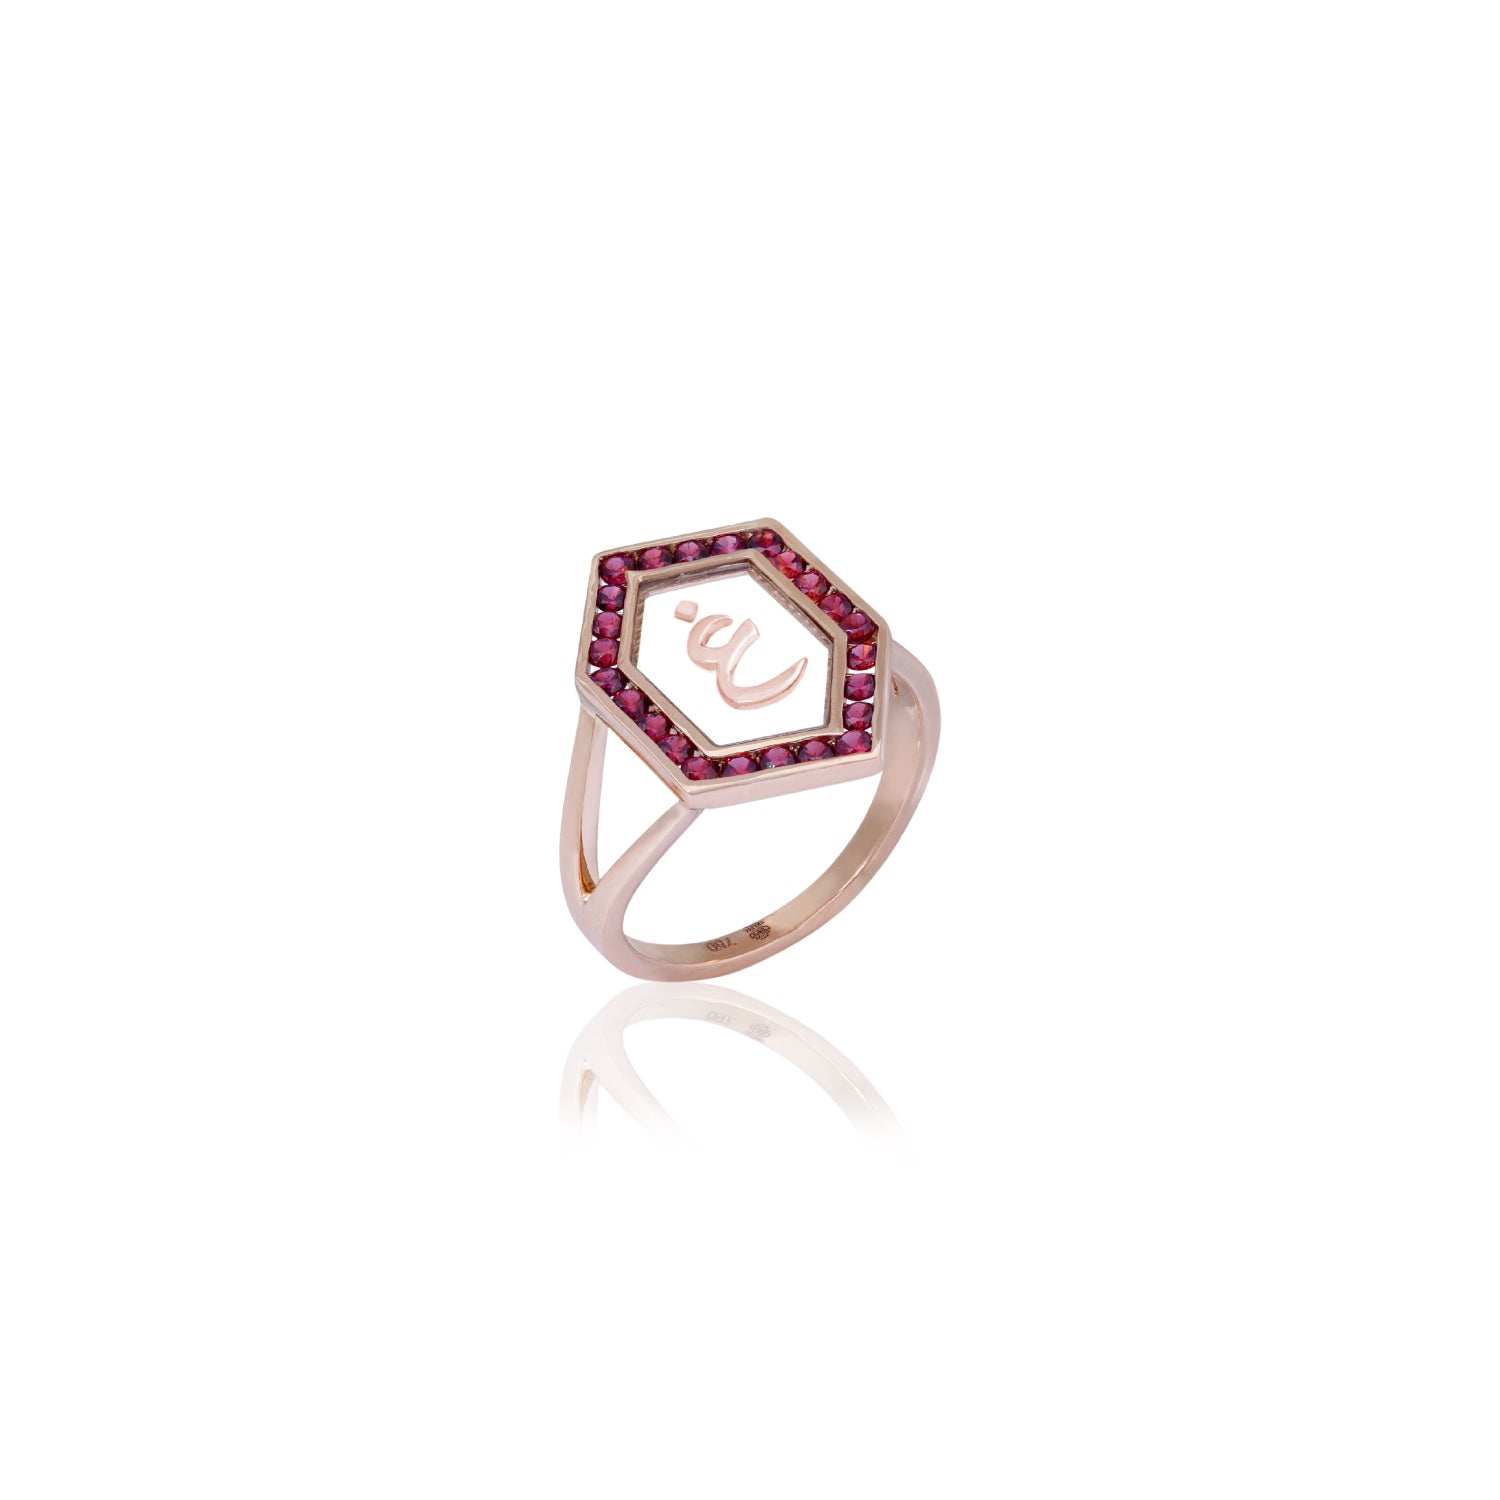 Qamoos 1.0 Letter غ Ruby Ring in Rose Gold